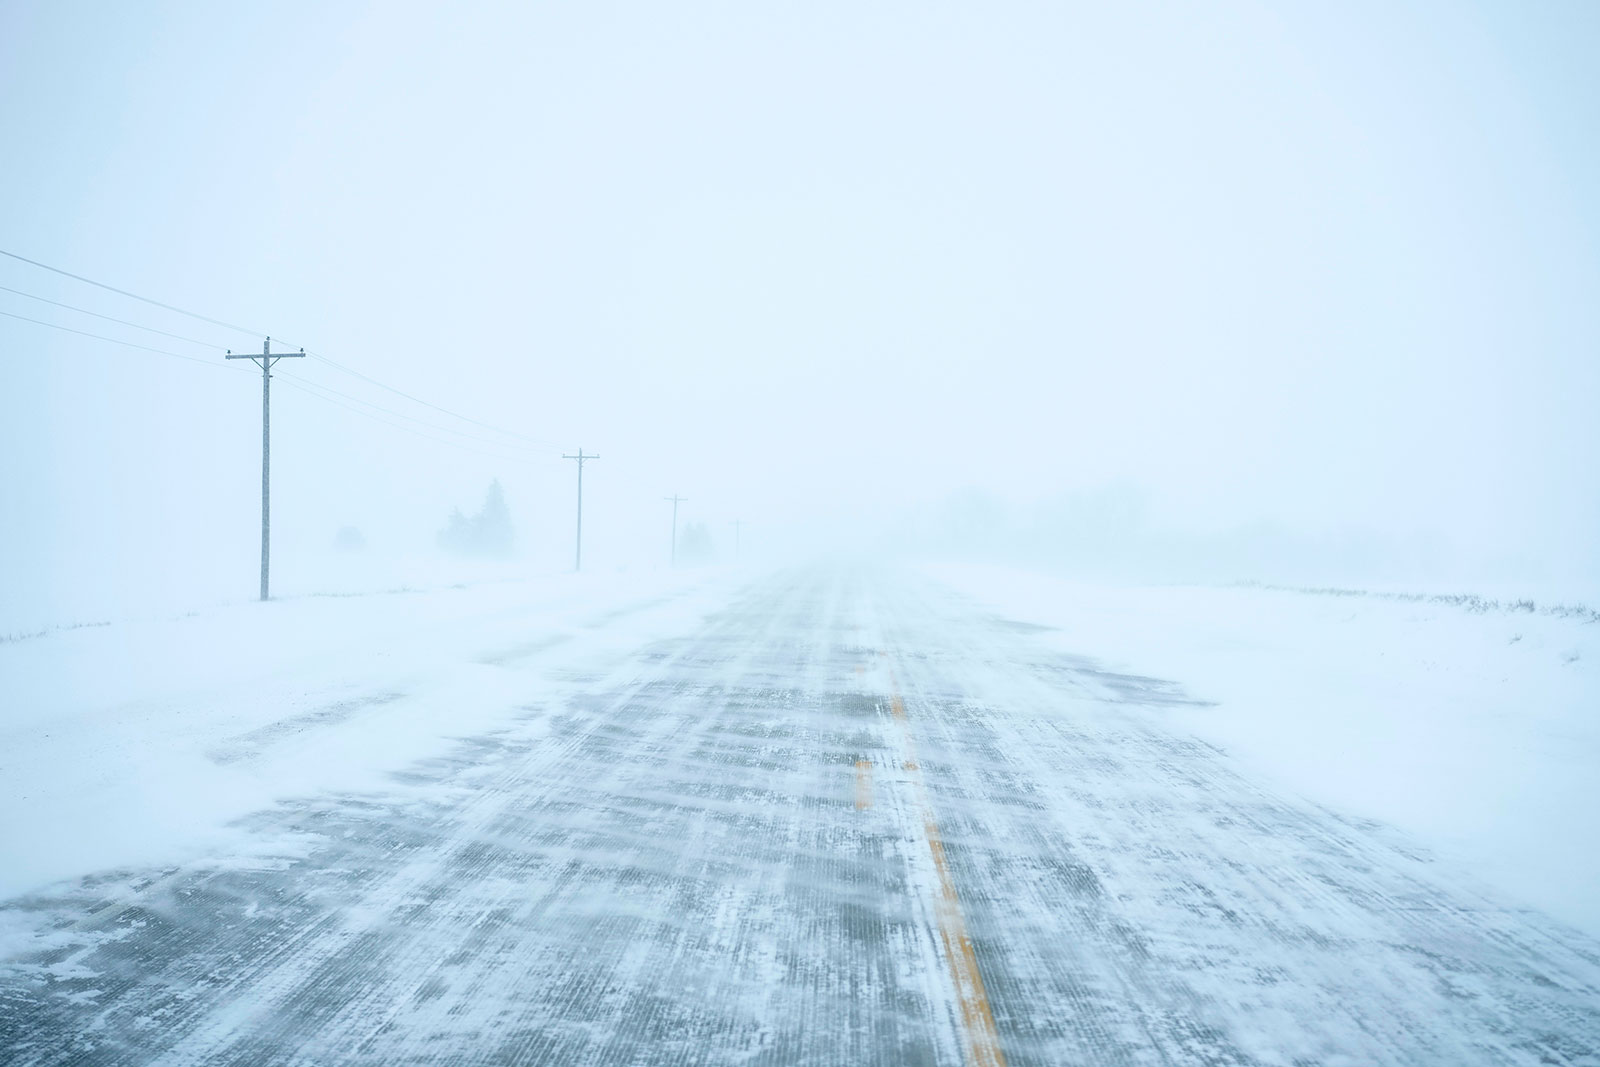 Snow blows over a county road near Merrill, Iowa, on Friday